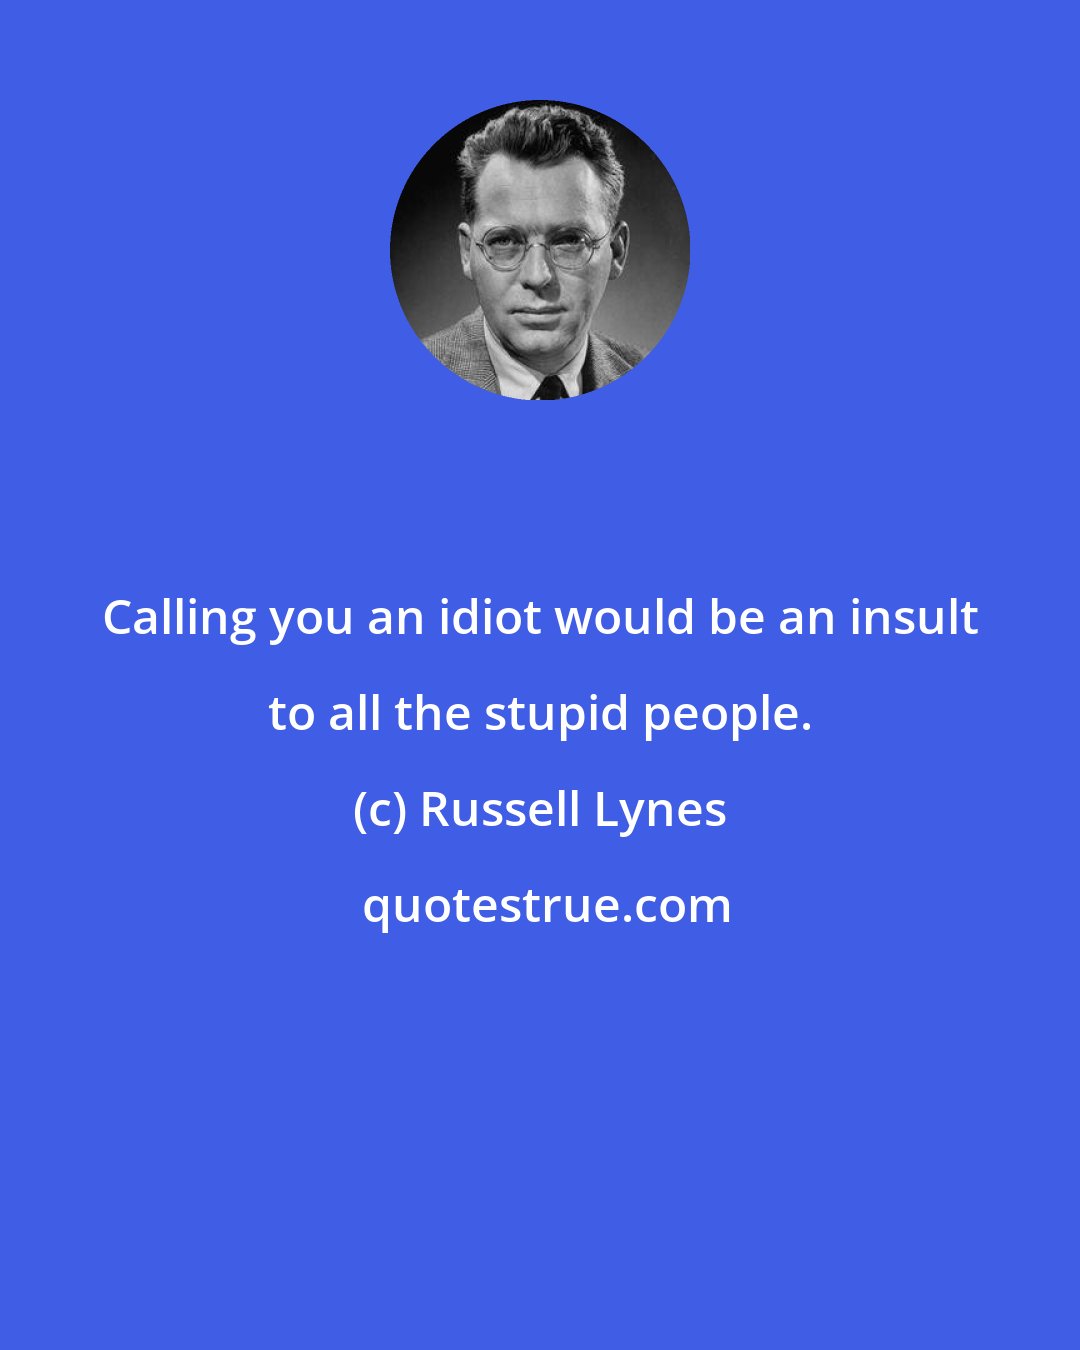 Russell Lynes: Calling you an idiot would be an insult to all the stupid people.